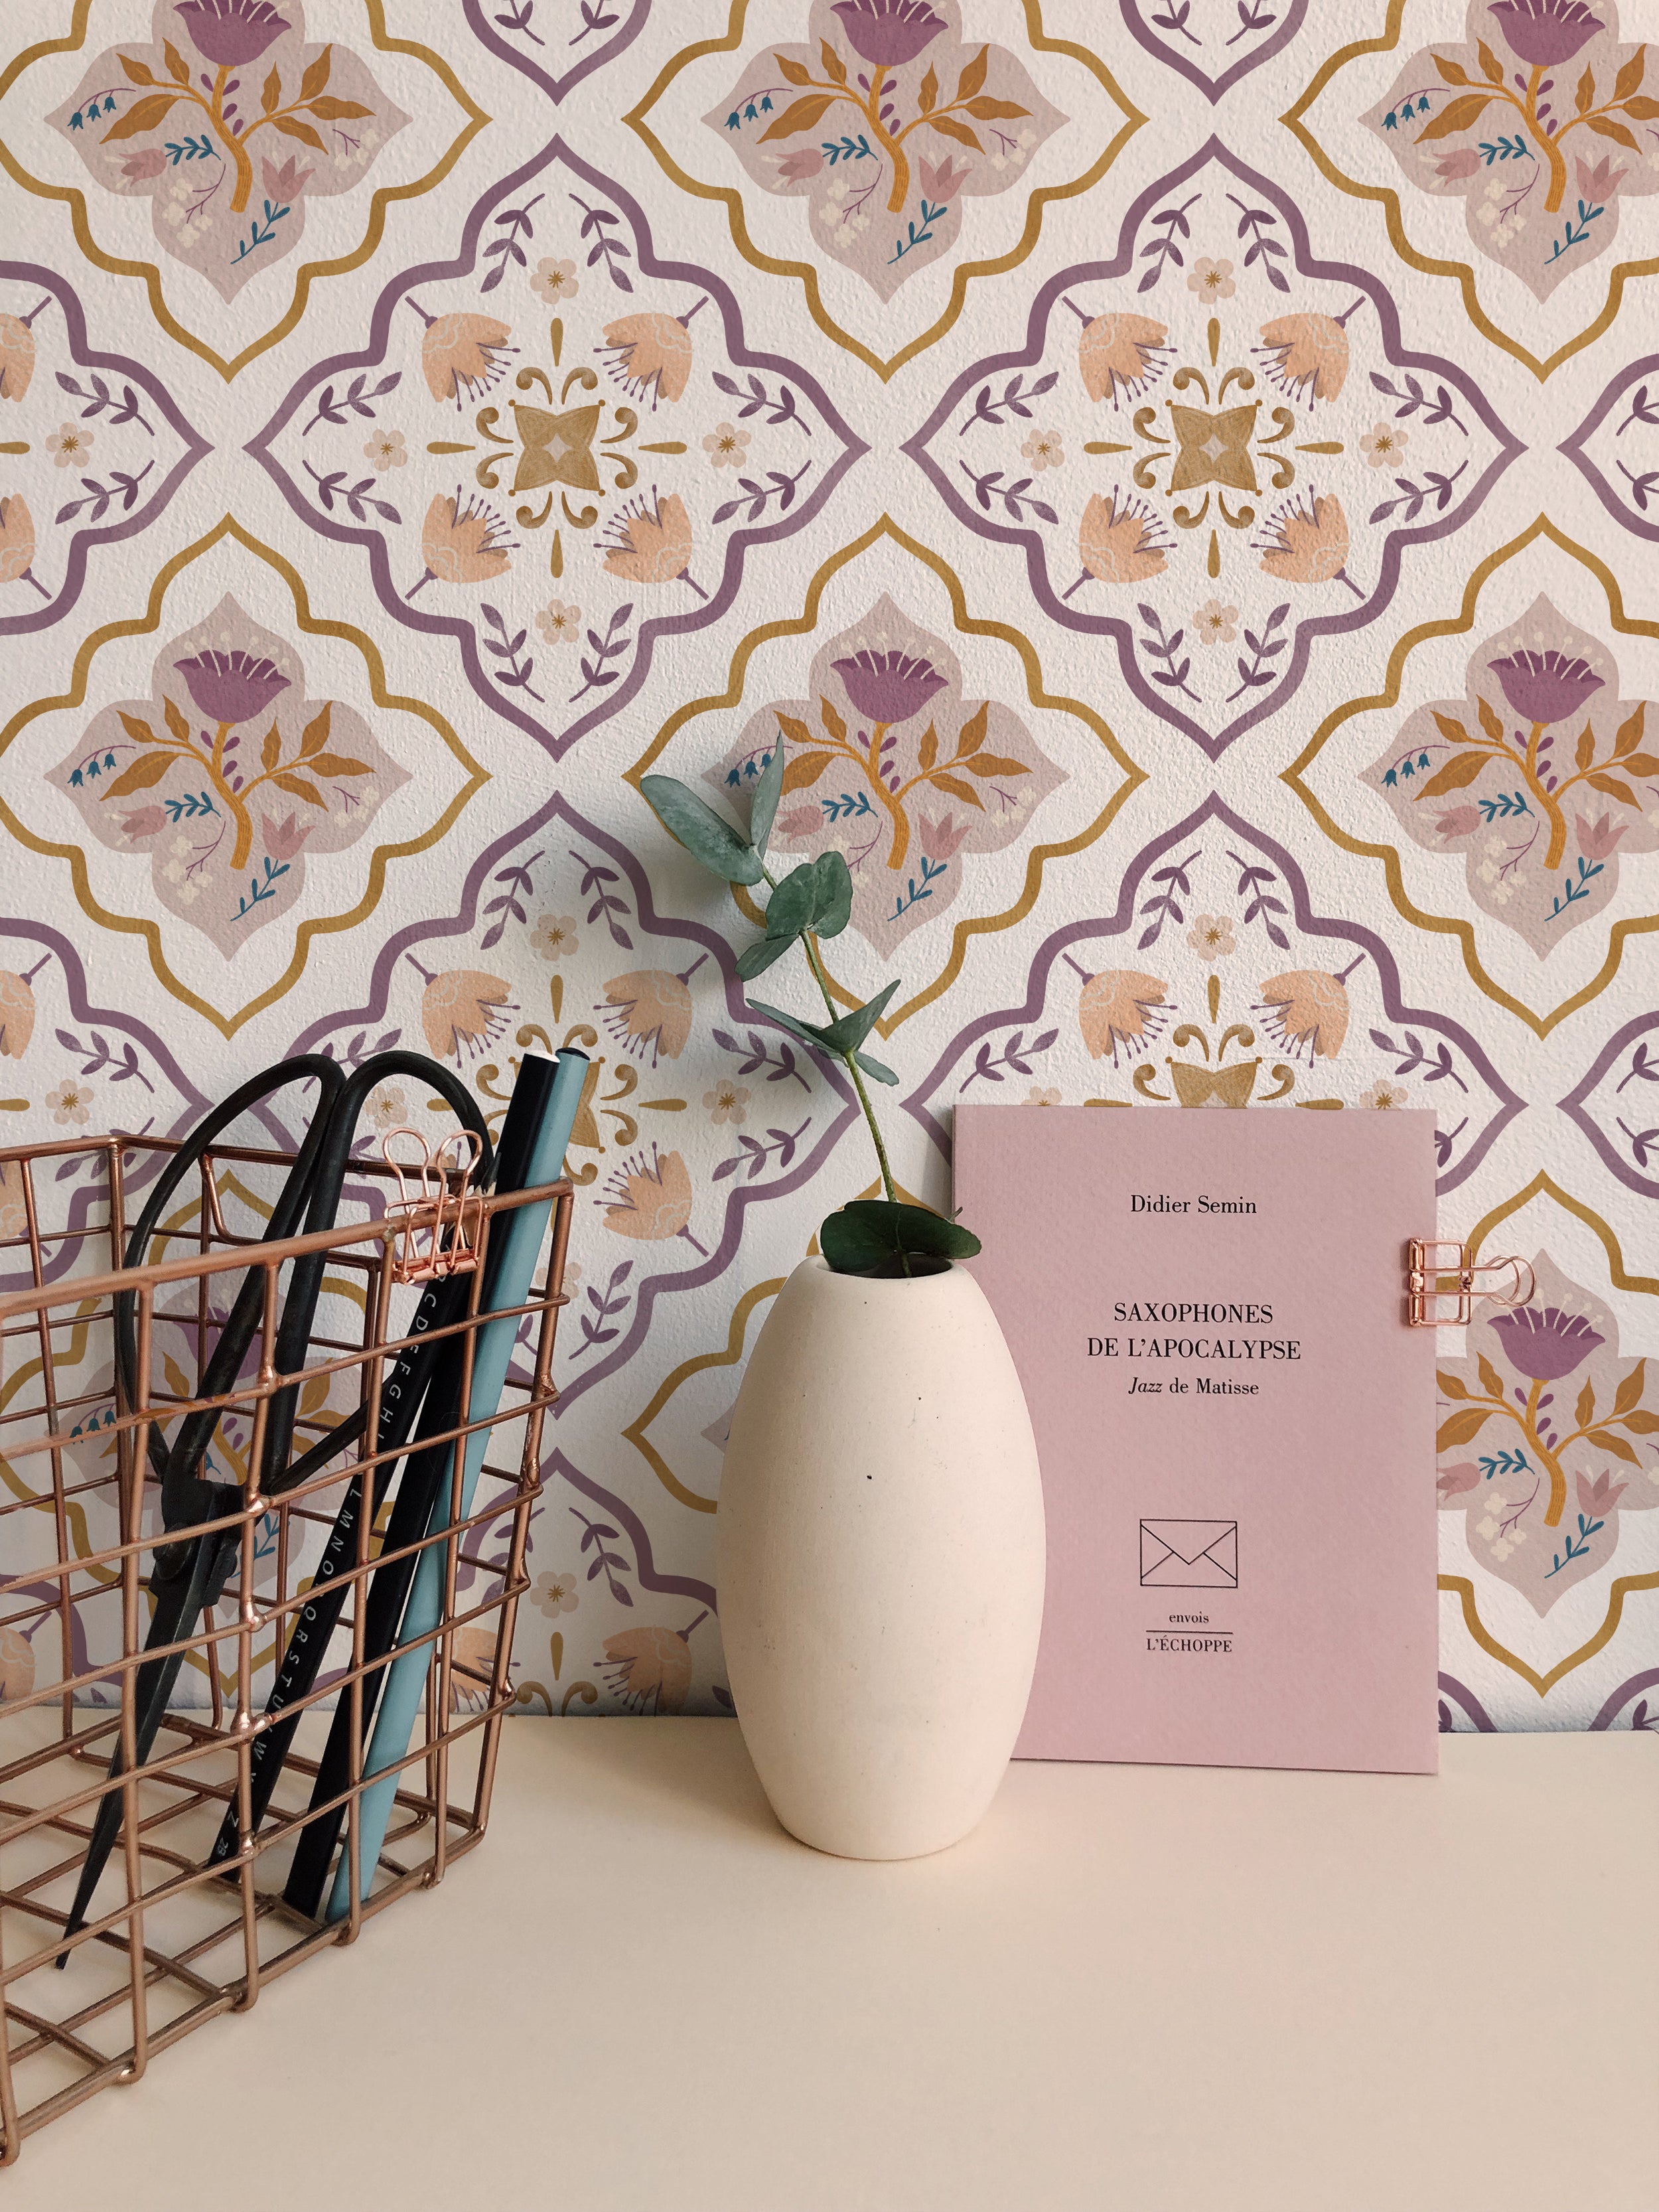 Home office setup with Moroccan Floral Tile Wallpaper in the background, showcasing a decorative setup with books, a vase, and office supplies.